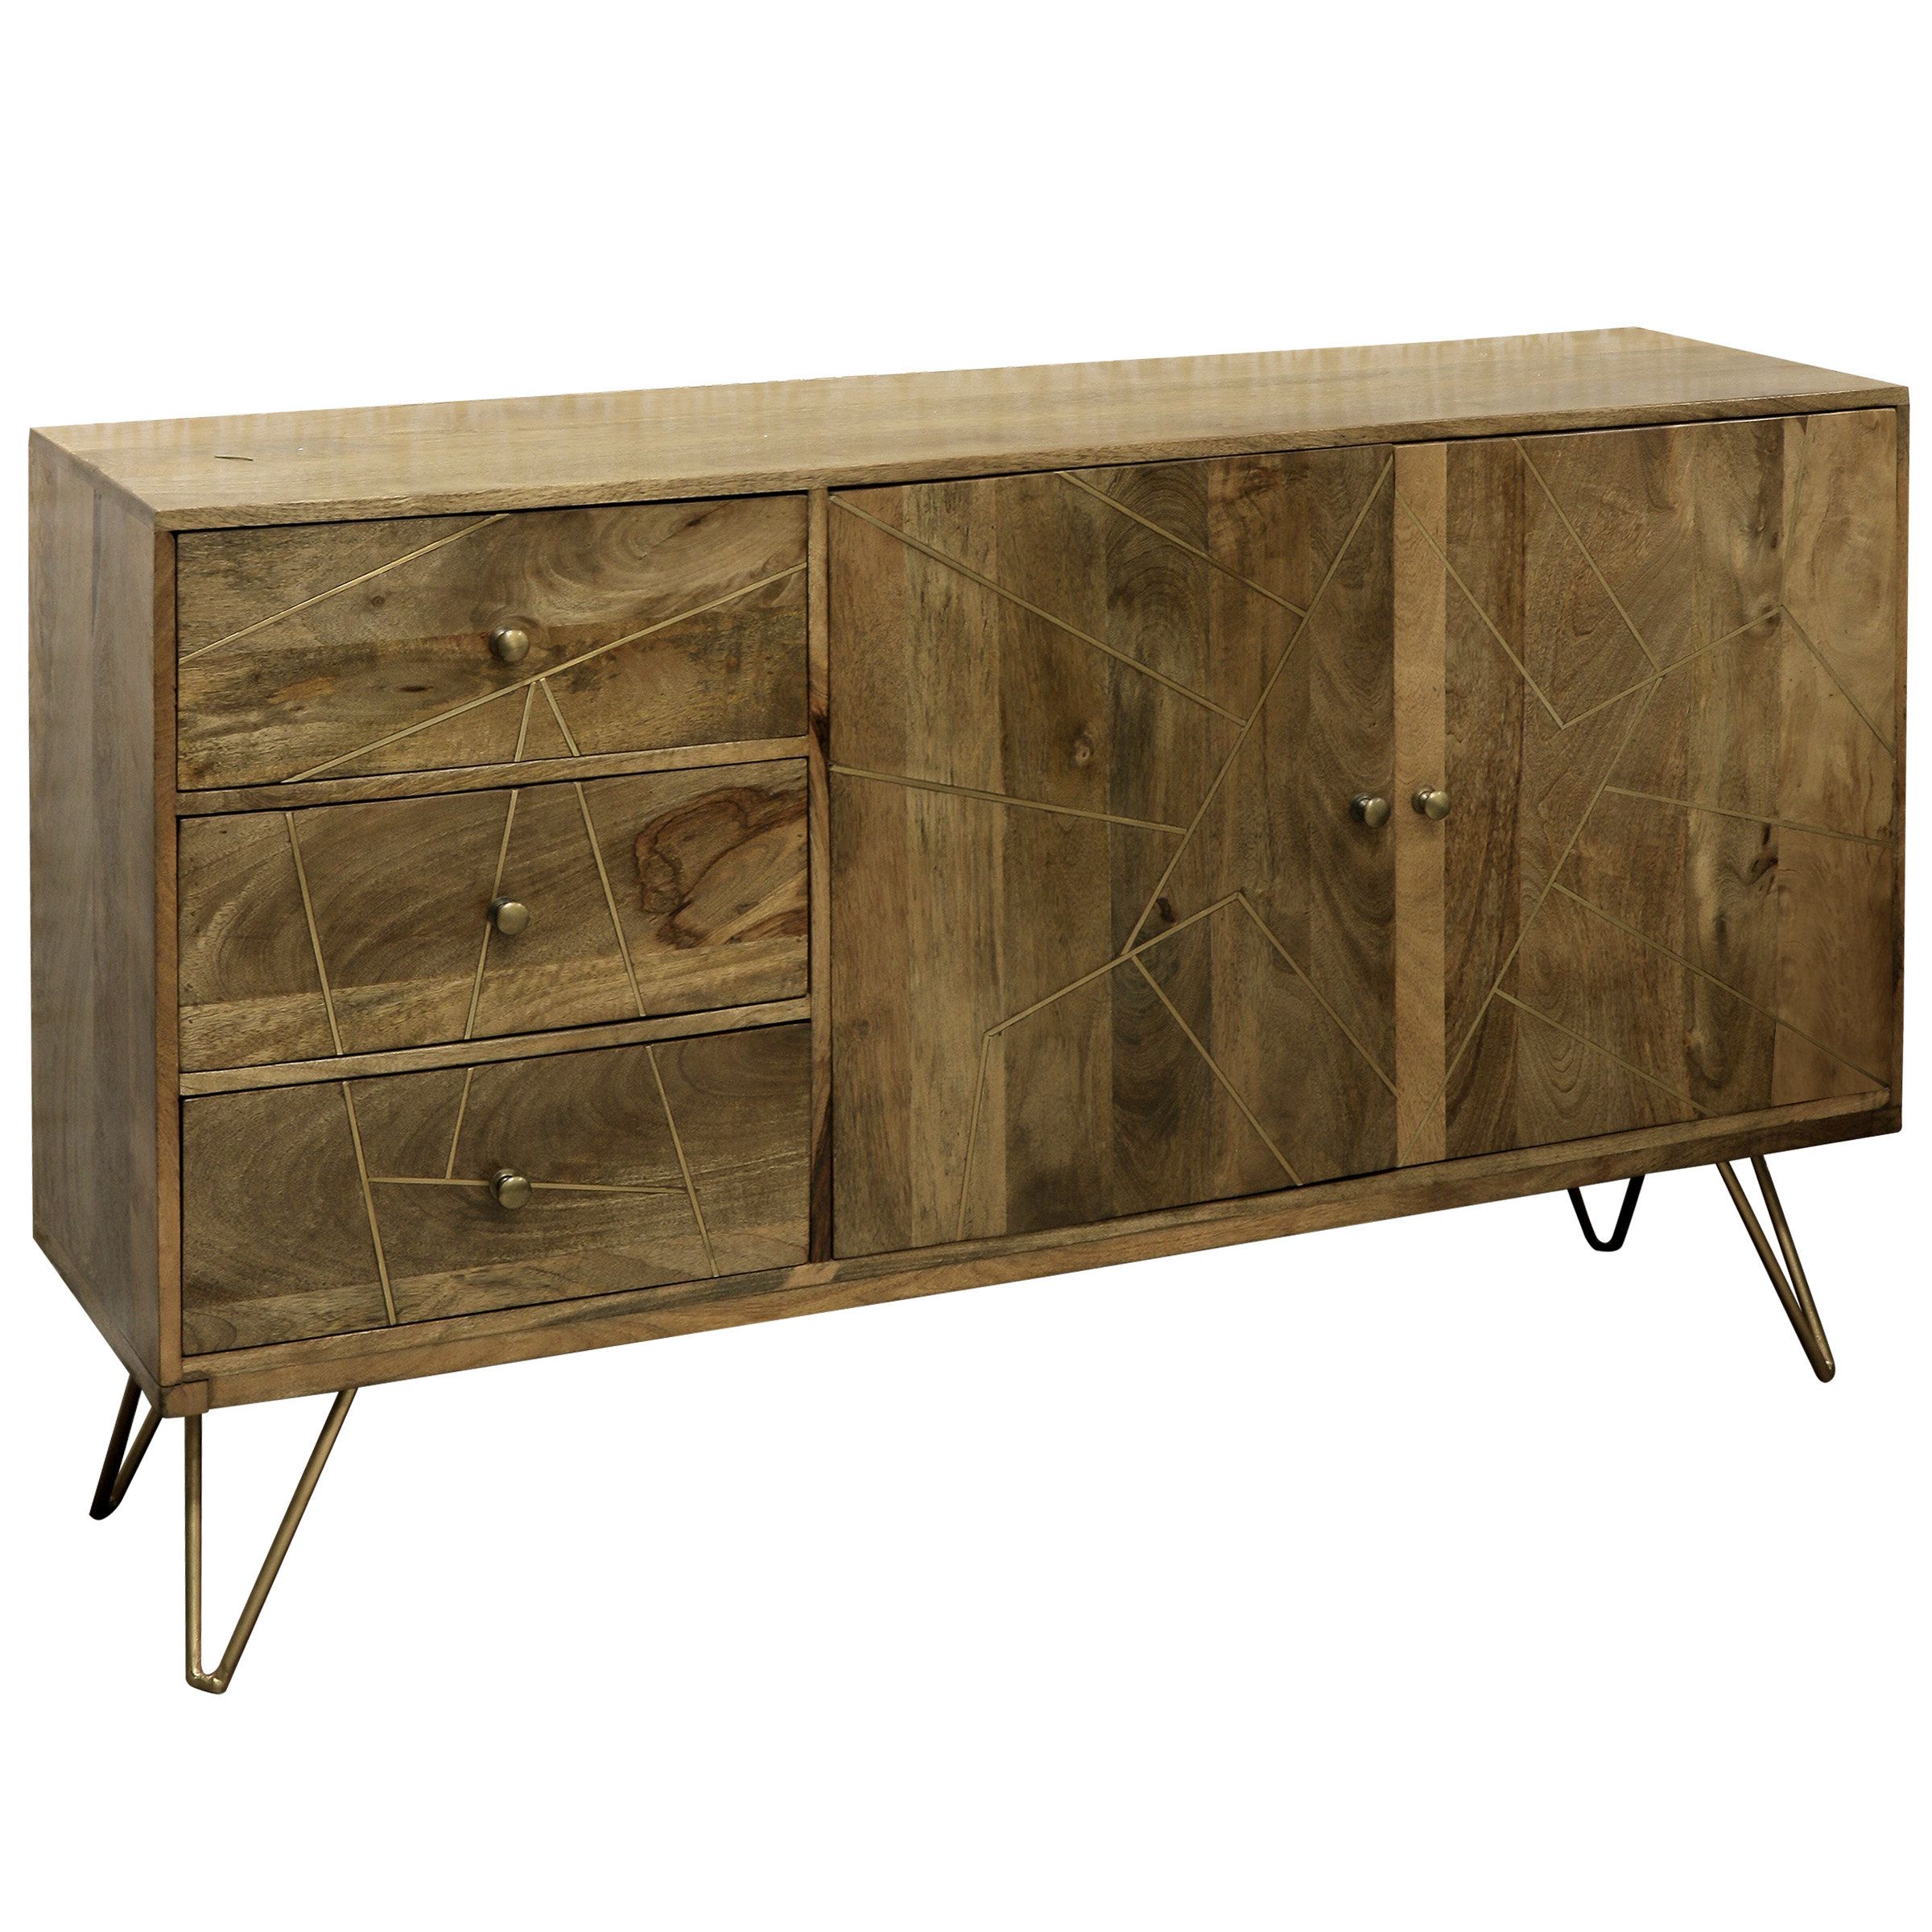 Thin Credenza You'll Love In 2019 | Wayfair Intended For Pale Pink Bulbs Credenzas (Gallery 19 of 20)